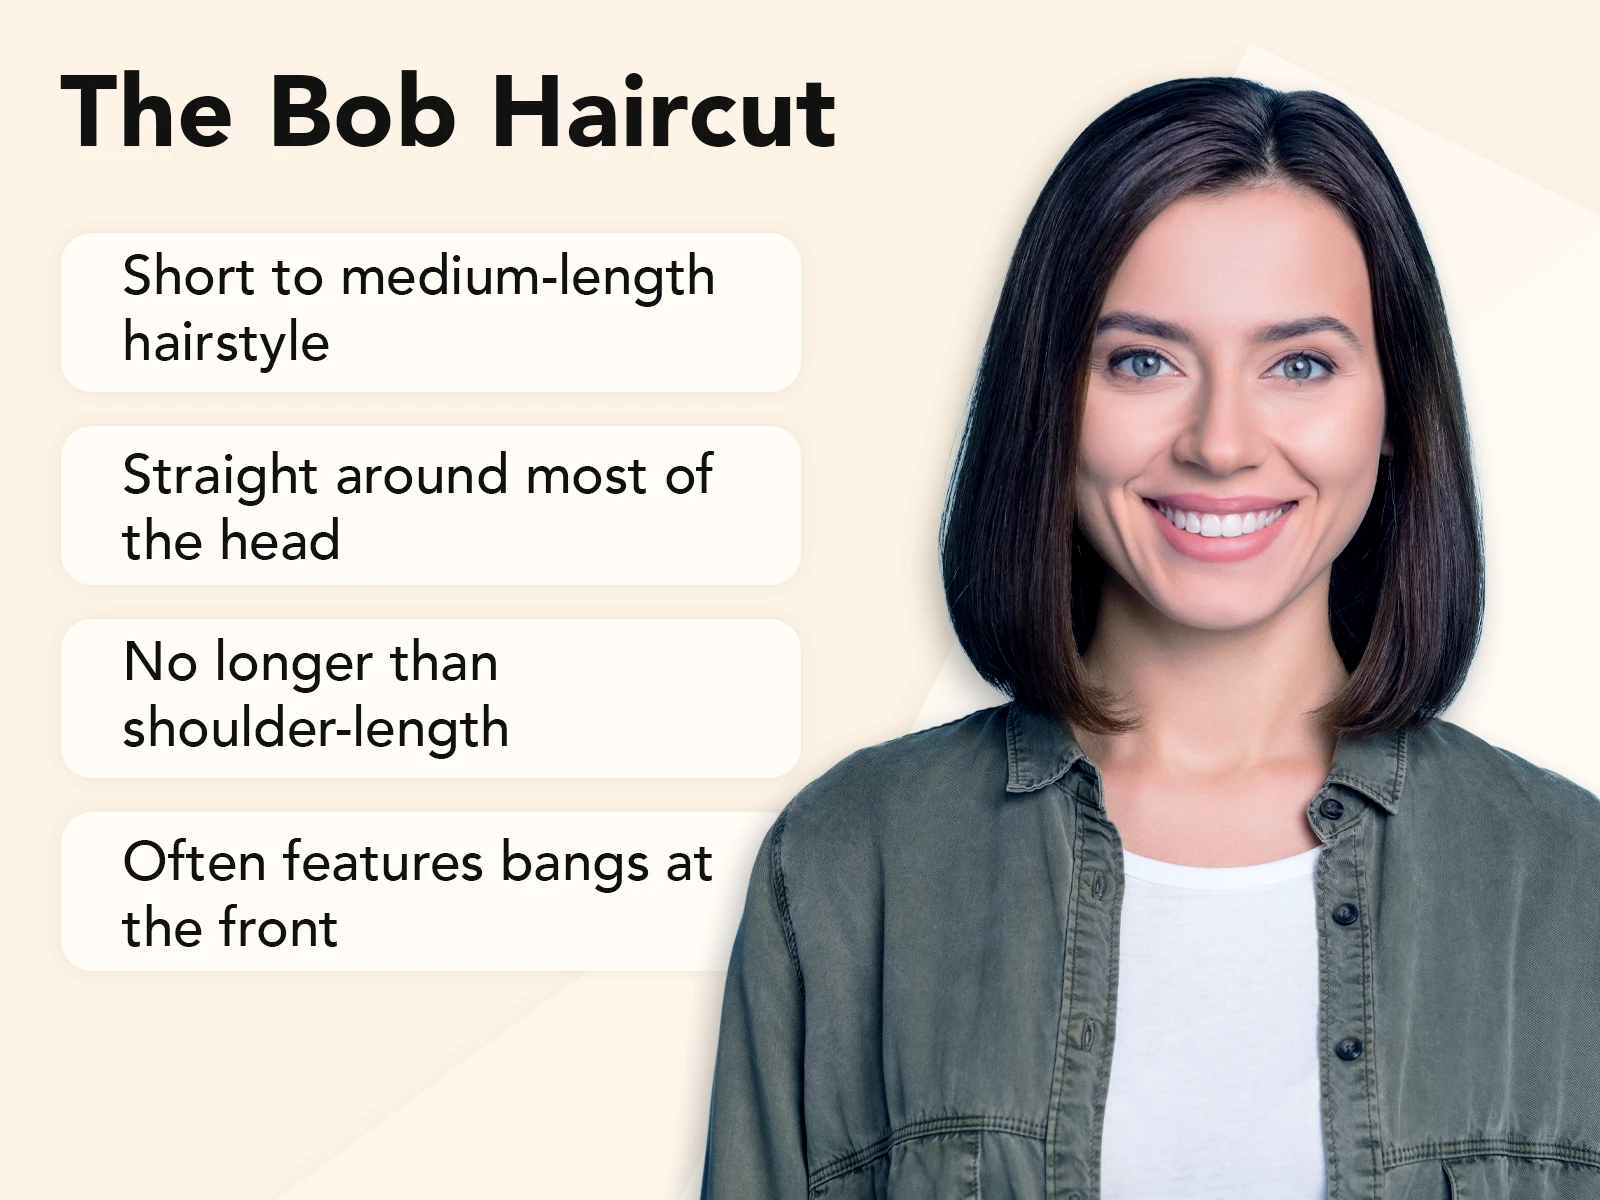 Explainer image of the bob haircut featuring a woman on the right and hairstyle traits on the left